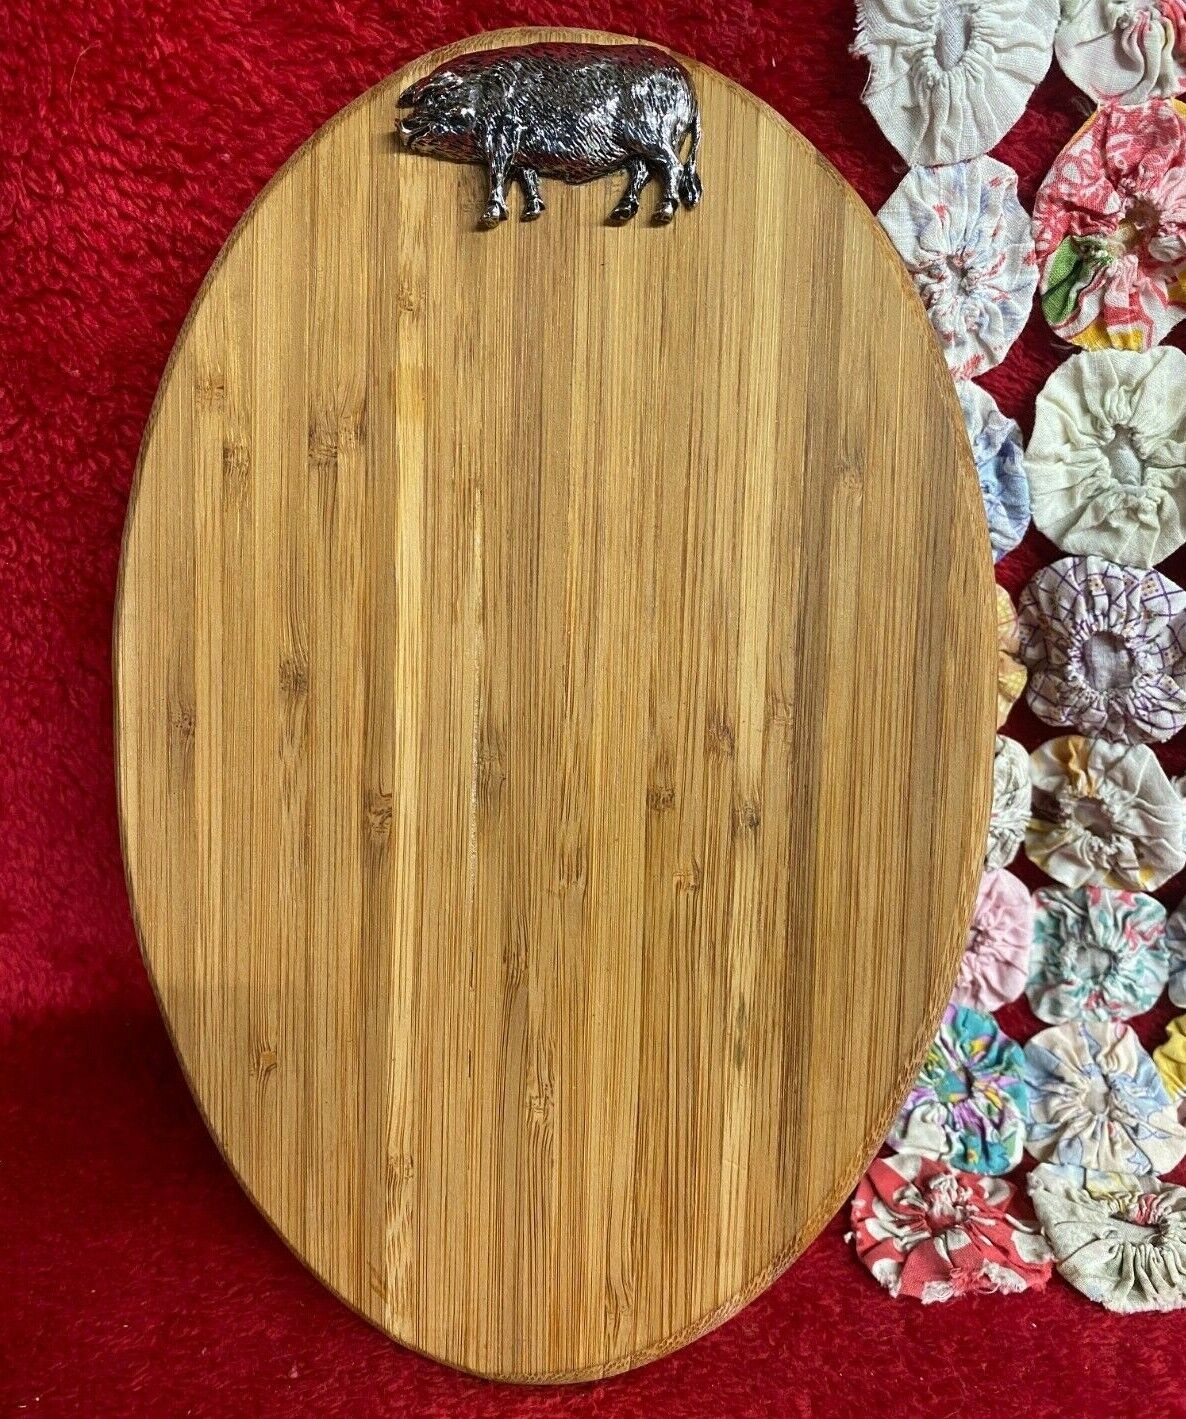 Wooden Cheese Board with Metal Pig Design 